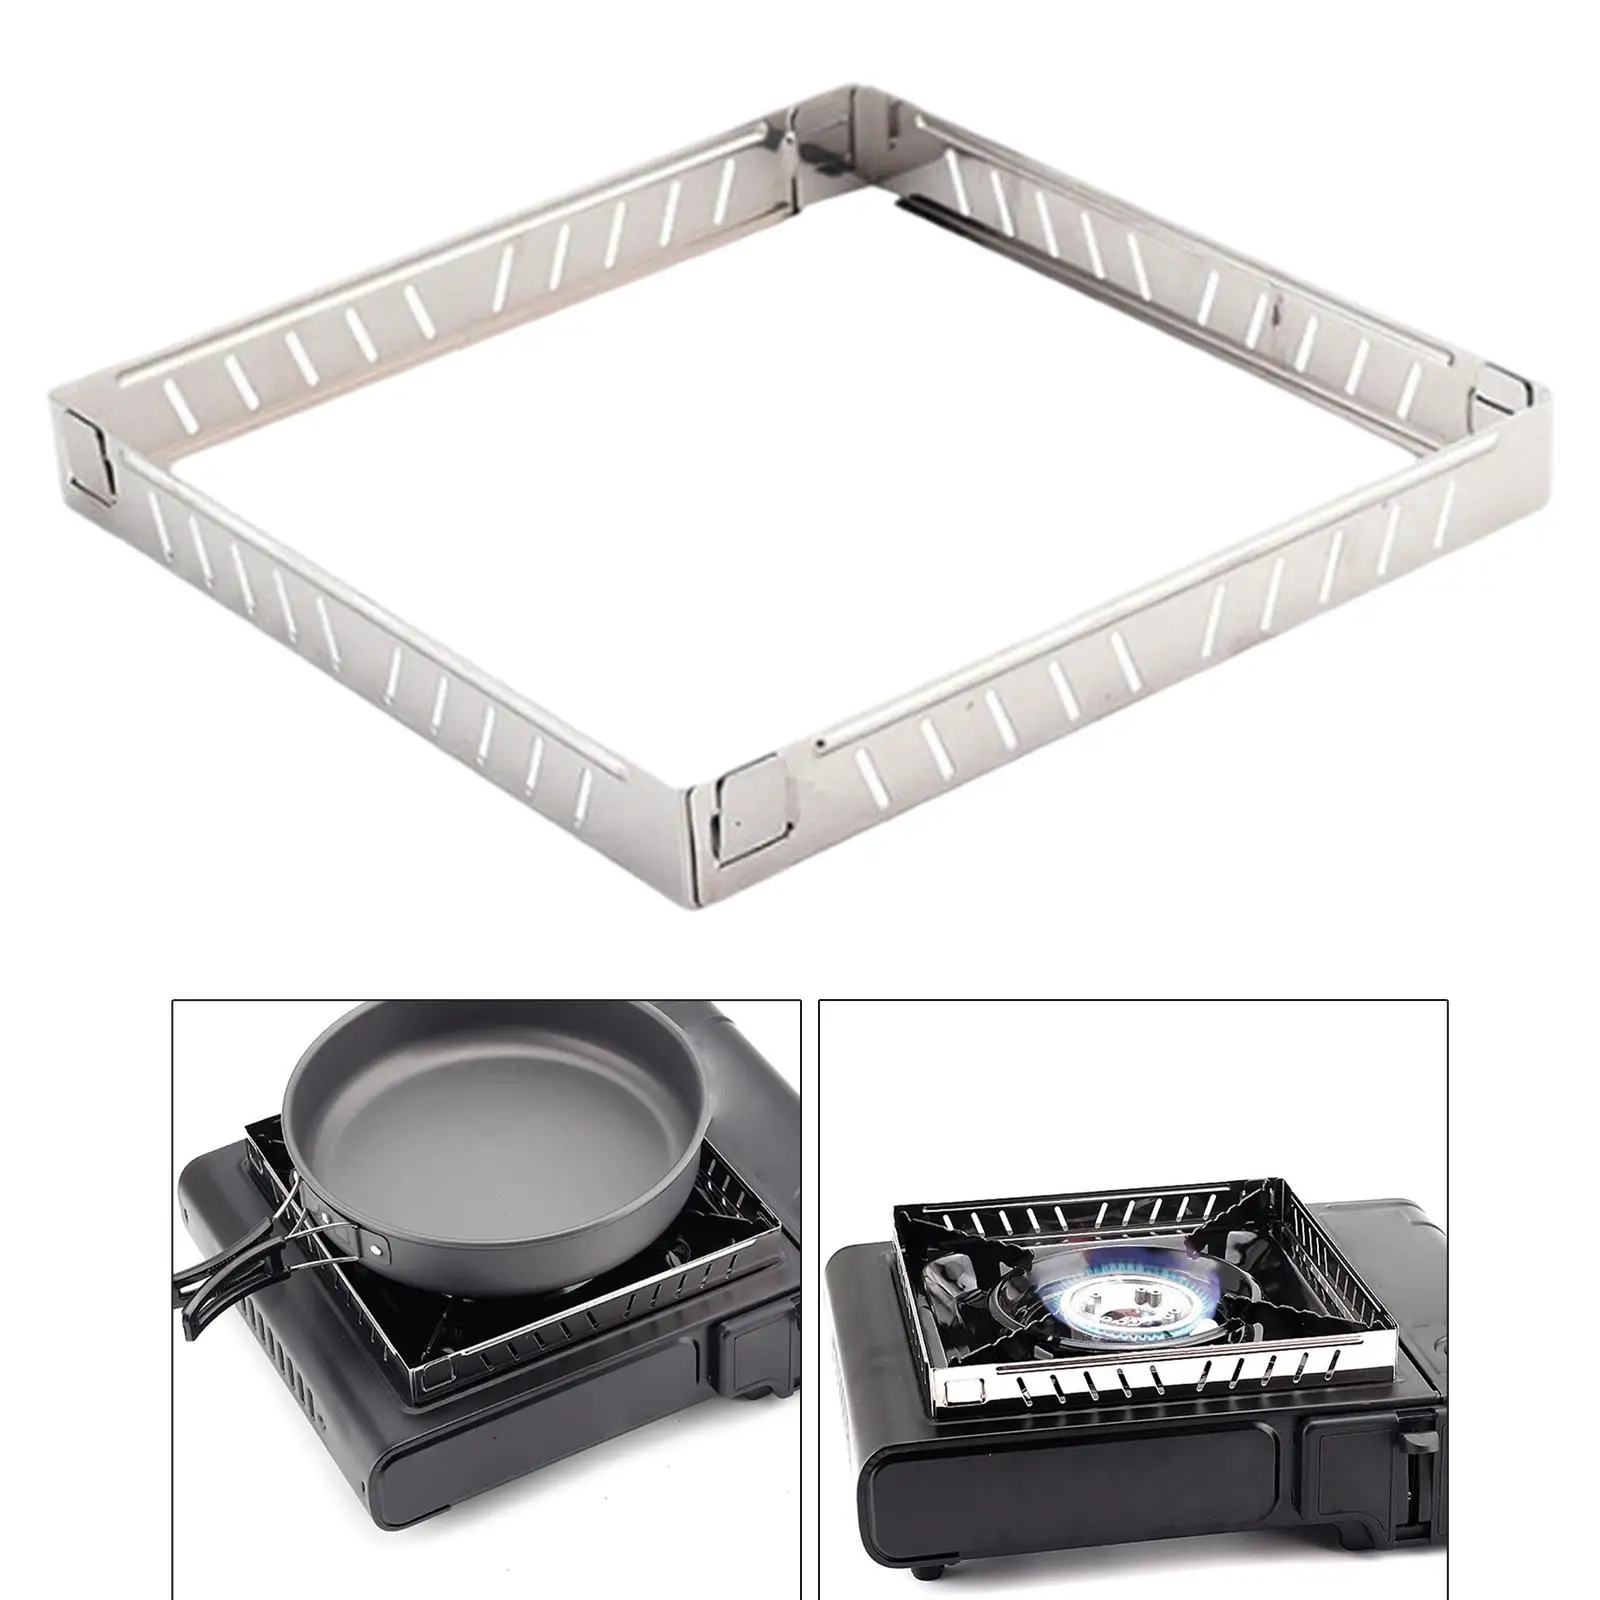 Outdoor Gas Stove Wind Screen Foldable Wind Shield Stainless Steel Burner Screen Cooking BBQ Stove Camping Hiking Accessories